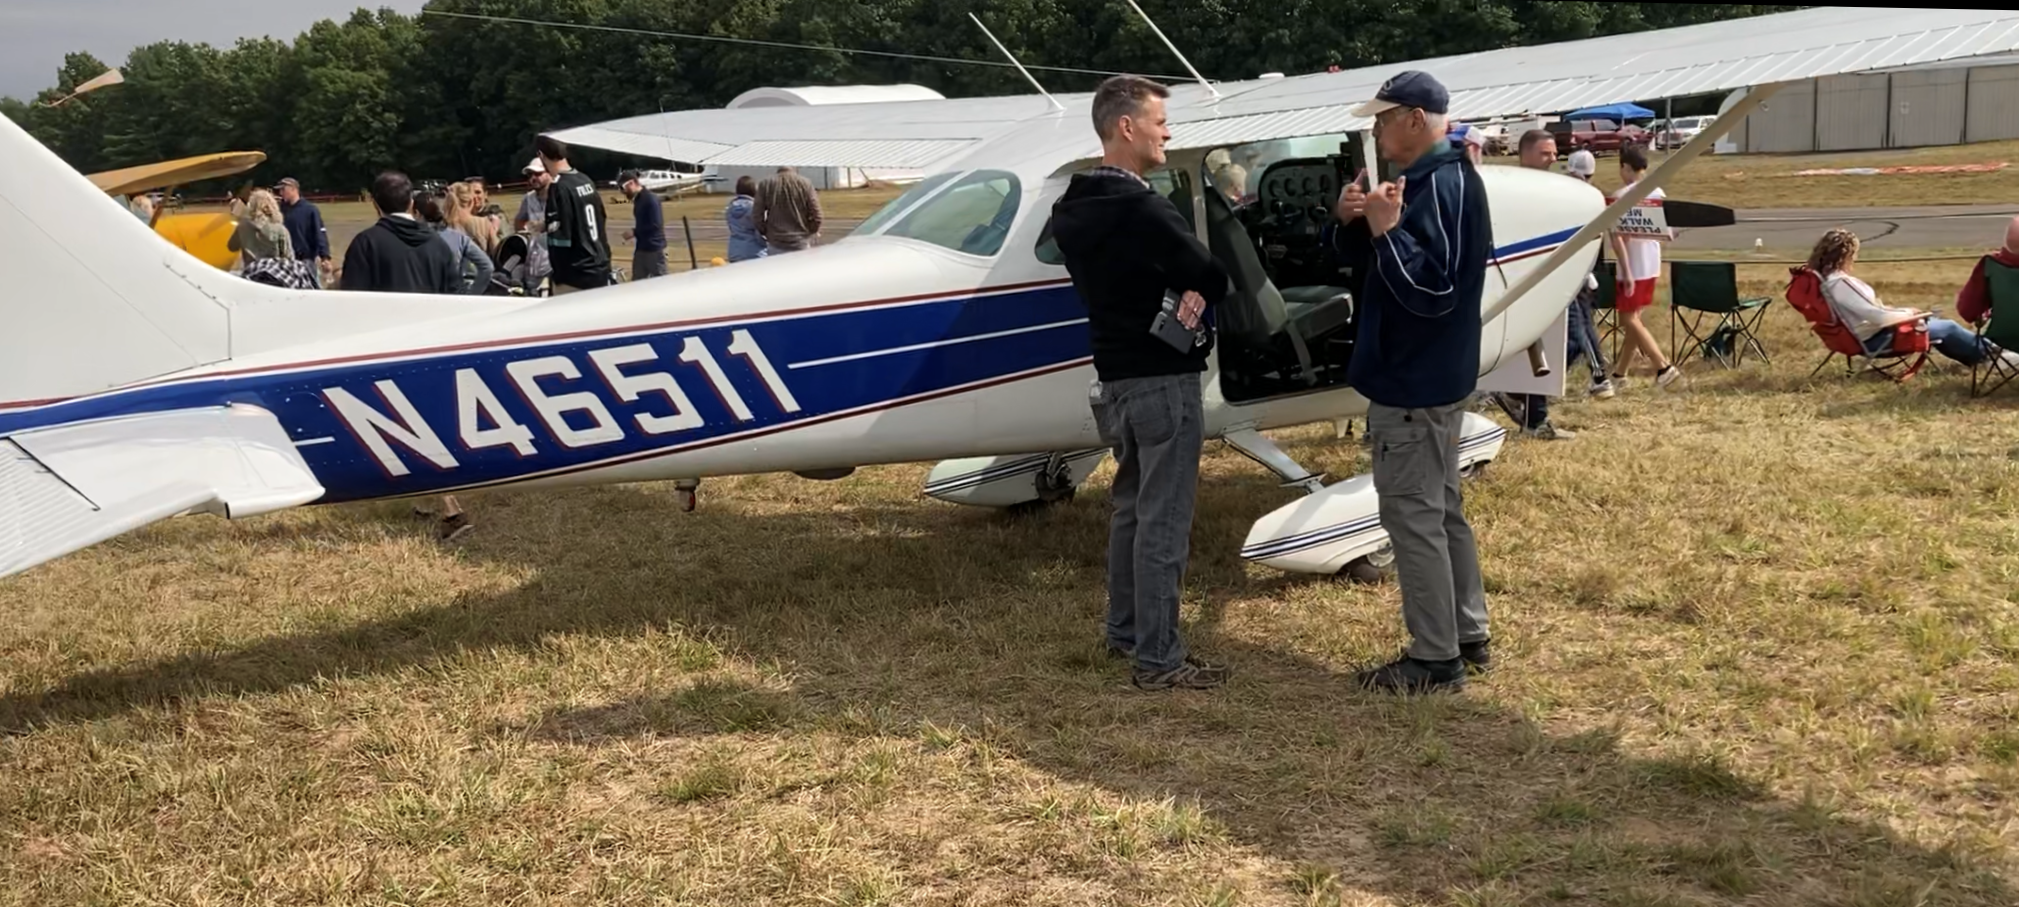 CVF at the Simsbury Fly In